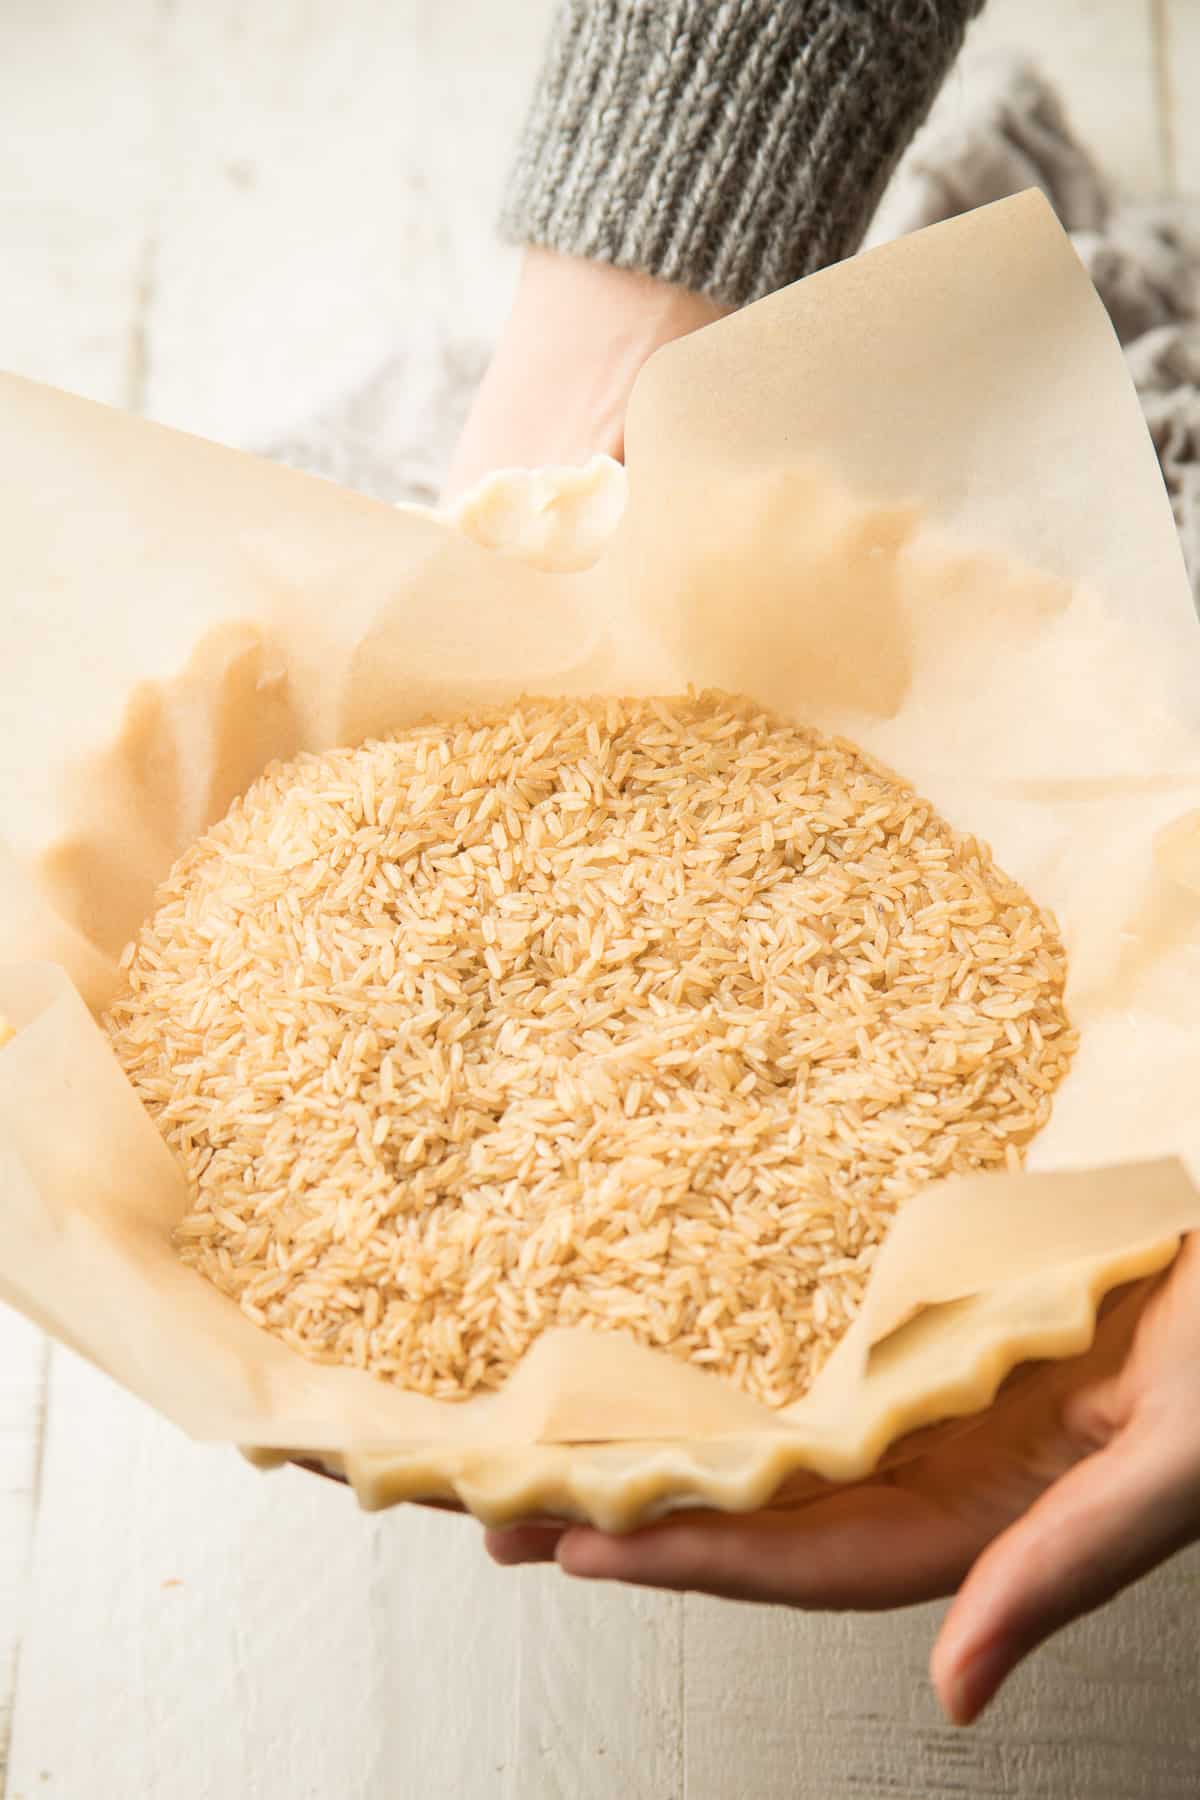 Hands holding a pie crust filled with rice.